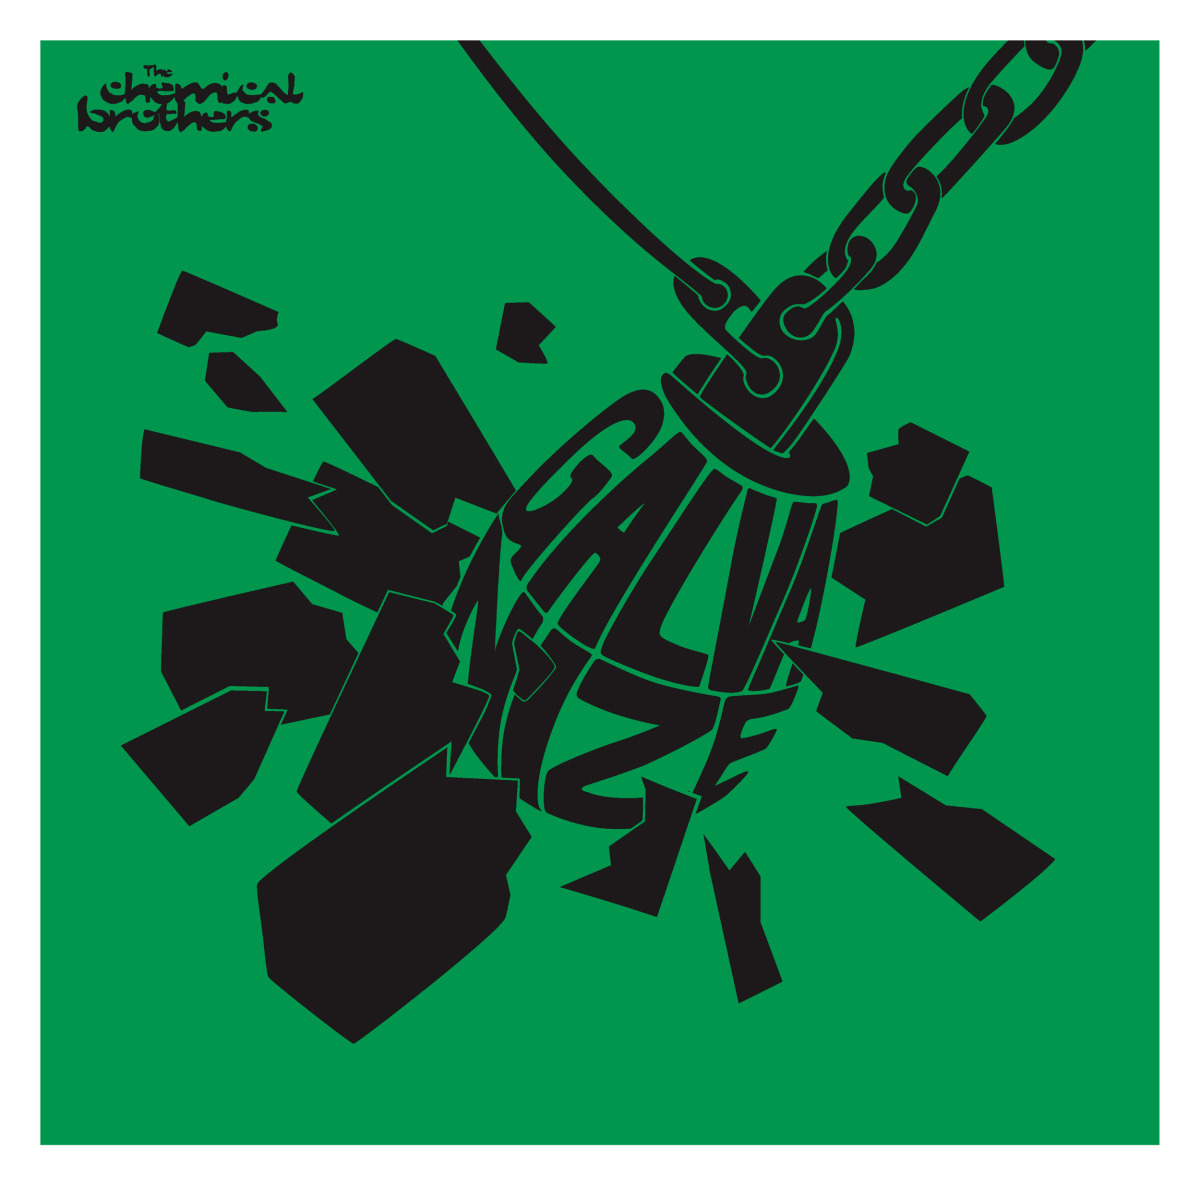 Kam Tang / Music / The Chemical Brothers&lt;span class=&quot;slide_numbers&quot;&gt;&lt;span class=&quot;slide_number&quot;&gt;5&lt;/span&gt;/8&lt;/span&gt;